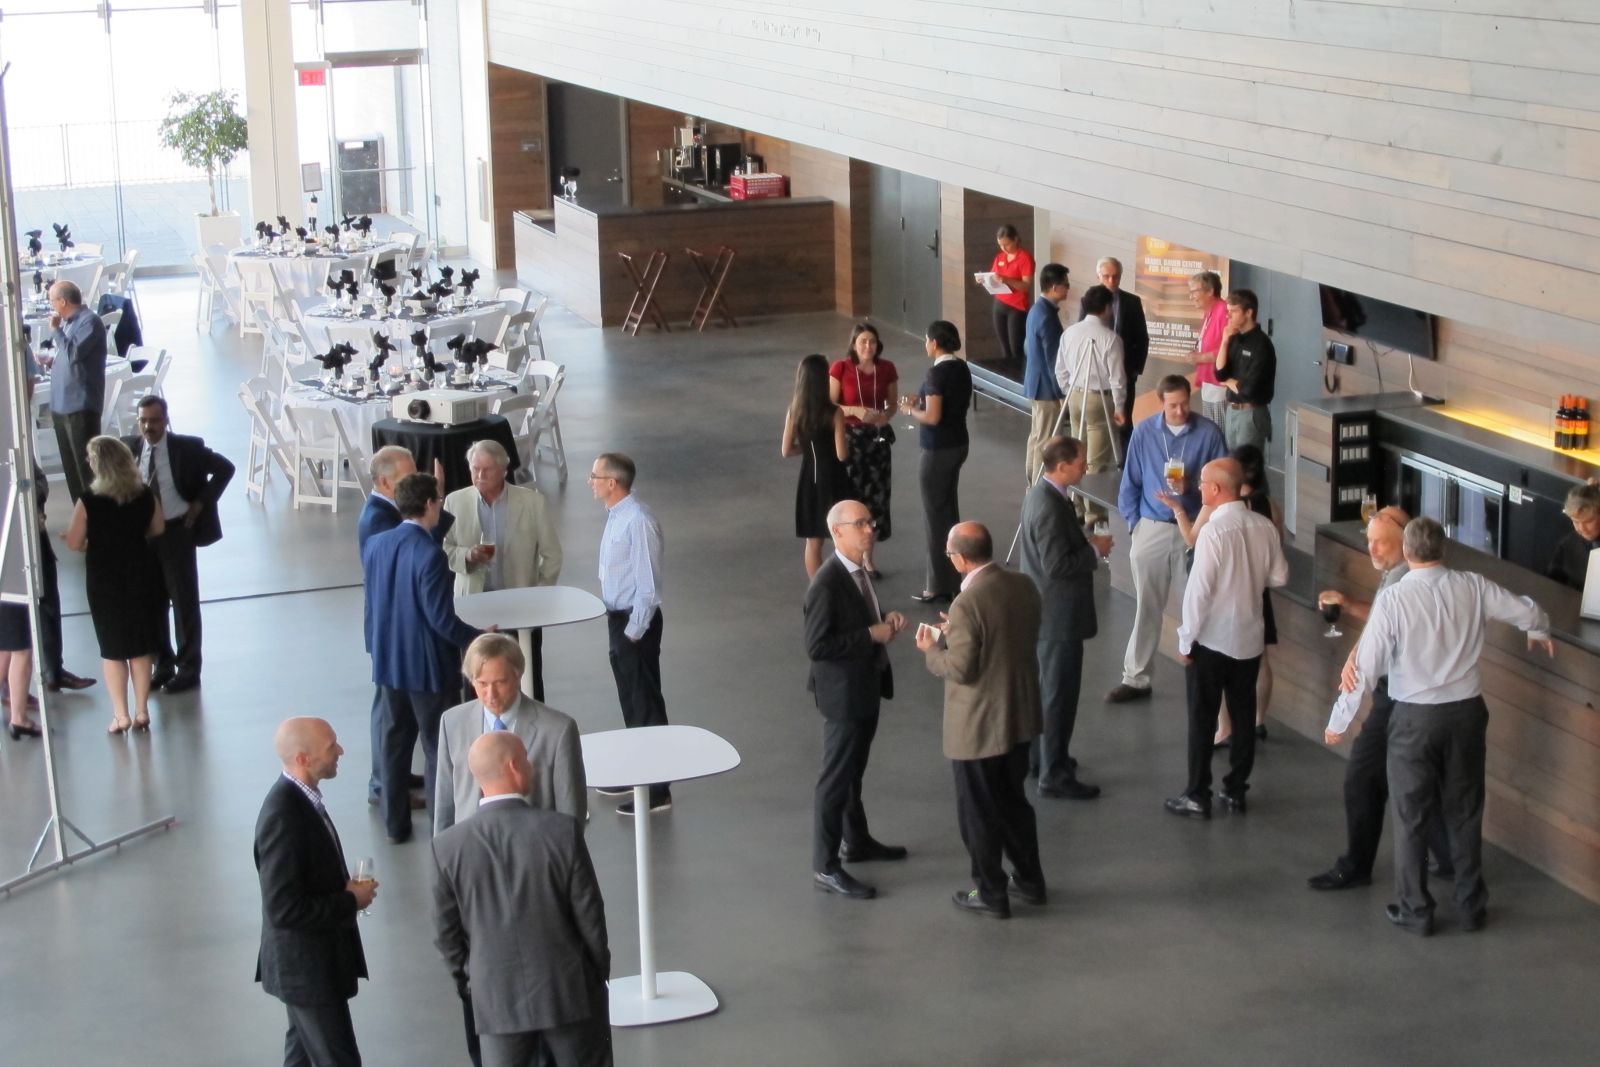 Photo: QCIC Event at the Bader Centre